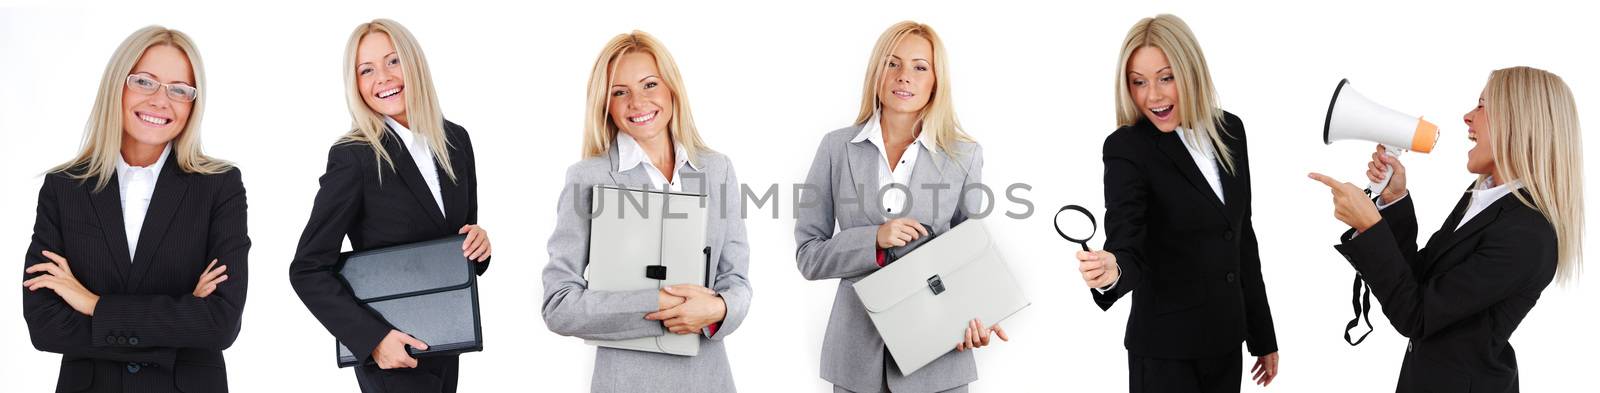 Set of photos of young business woman in various poses with case megaphone magnifier isolated on white